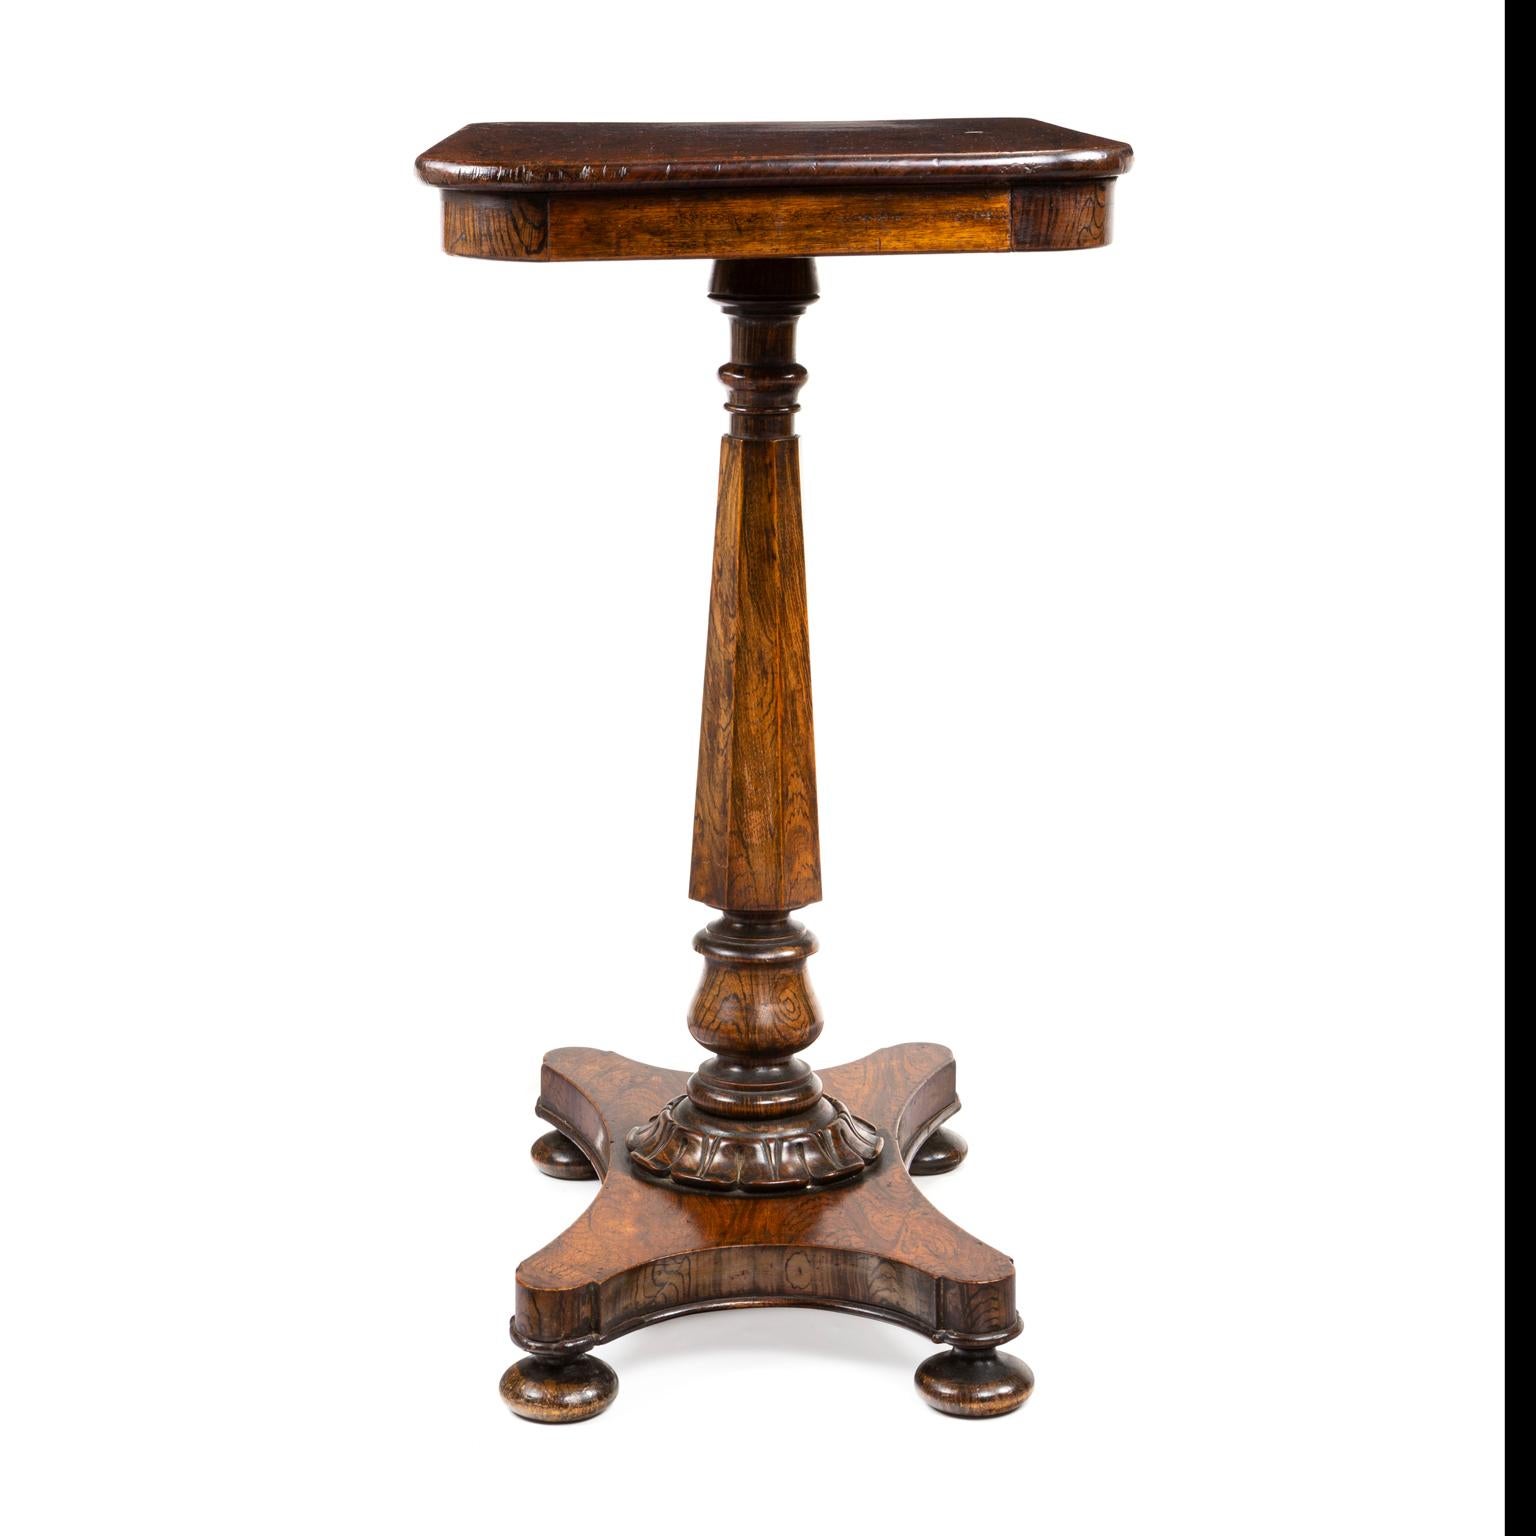 Beech Small and Attractive Regency Pedestal Table Attributed to Gillows of Lancaster